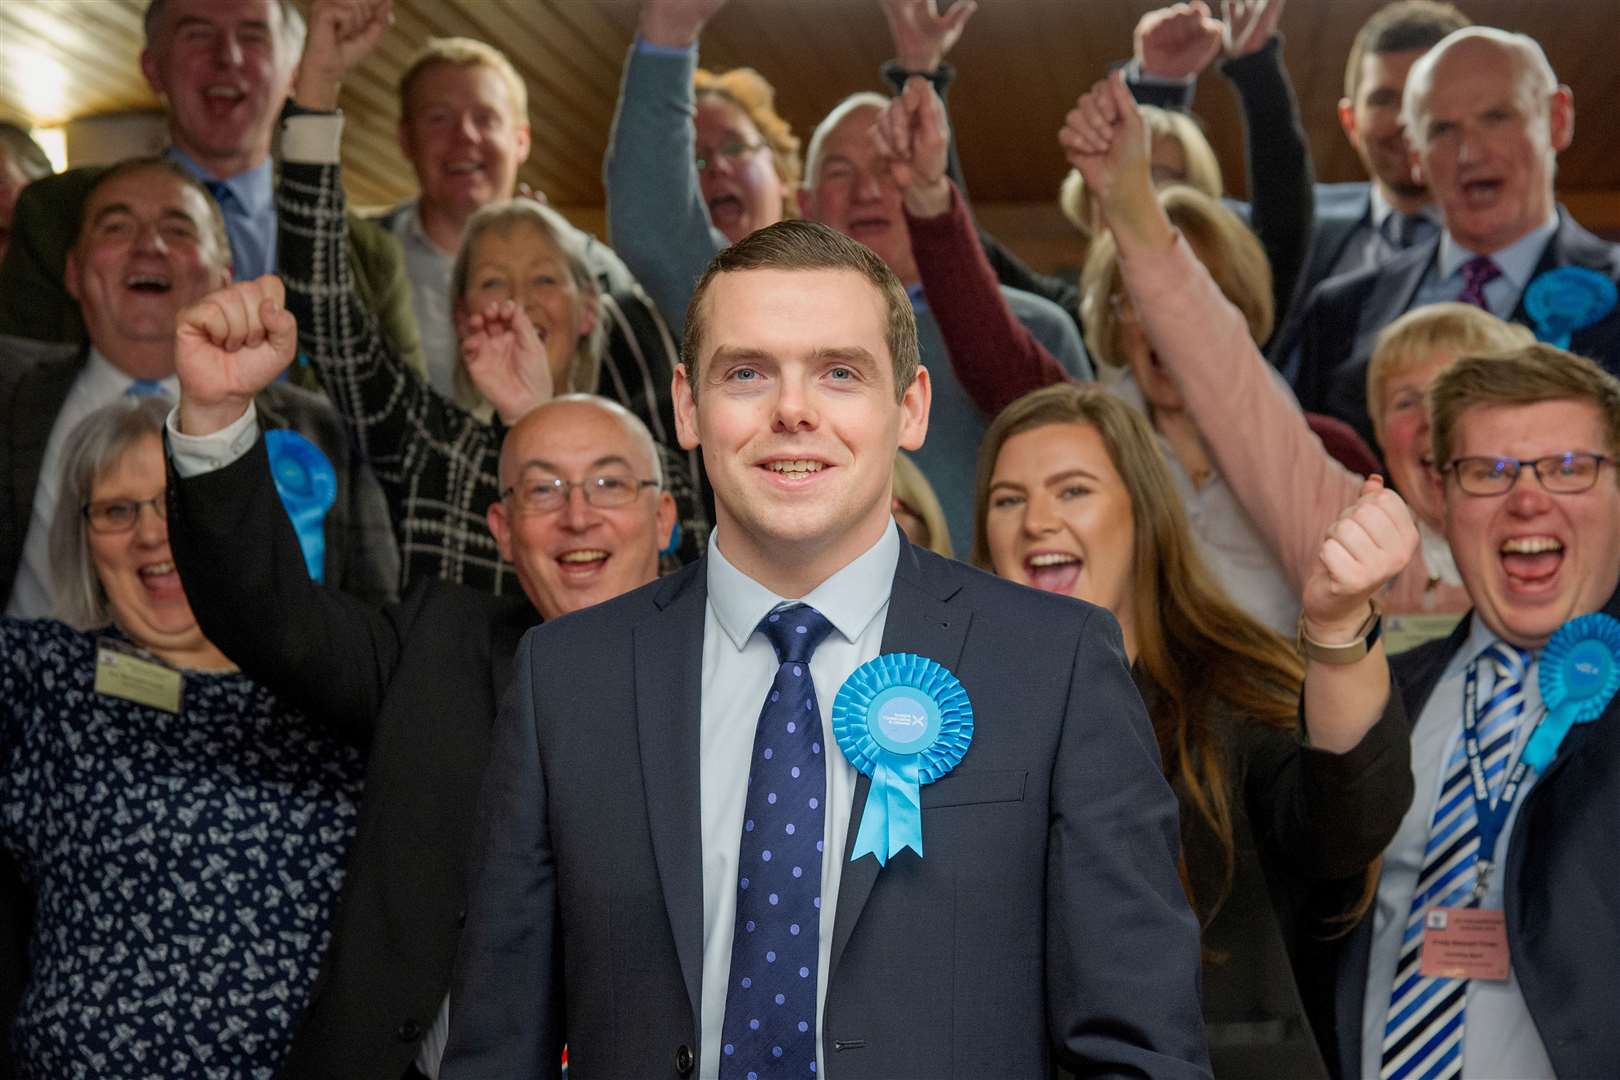 Celebrating his re-election as Moray MP in Elgin Town Hall on Thursday, December 12, 2019. Picture: Daniel Forsyth